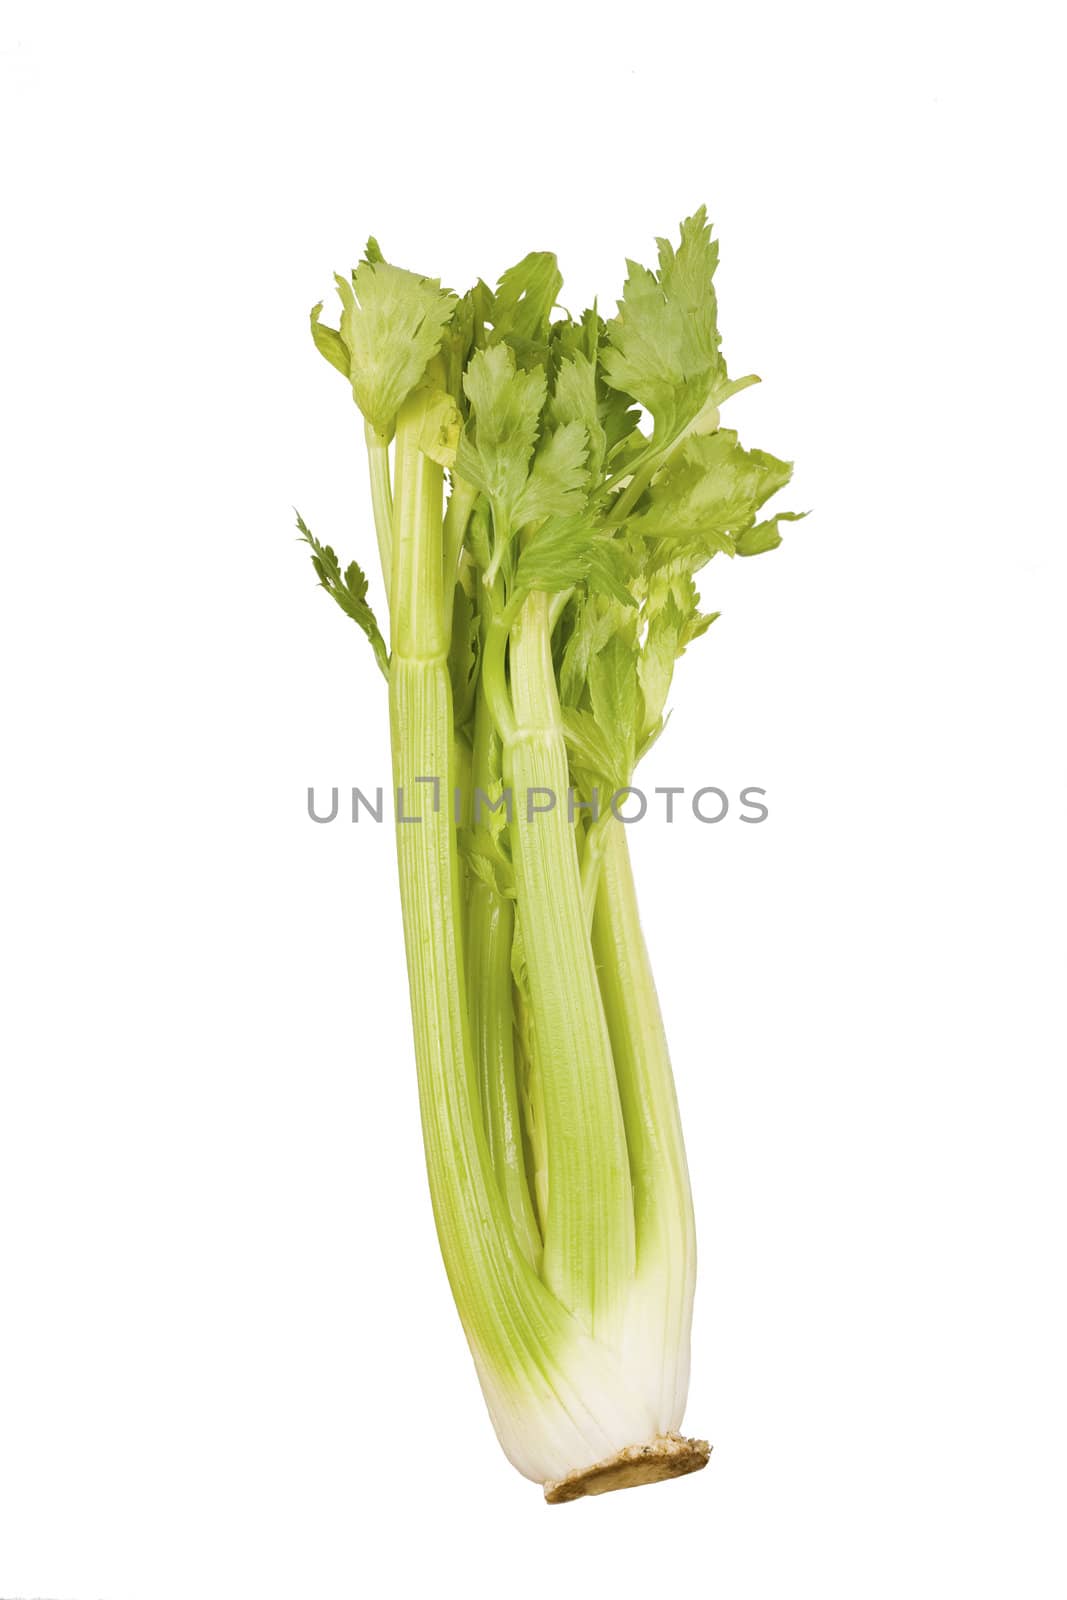 Stalk of green celery isolated on white by jarenwicklund